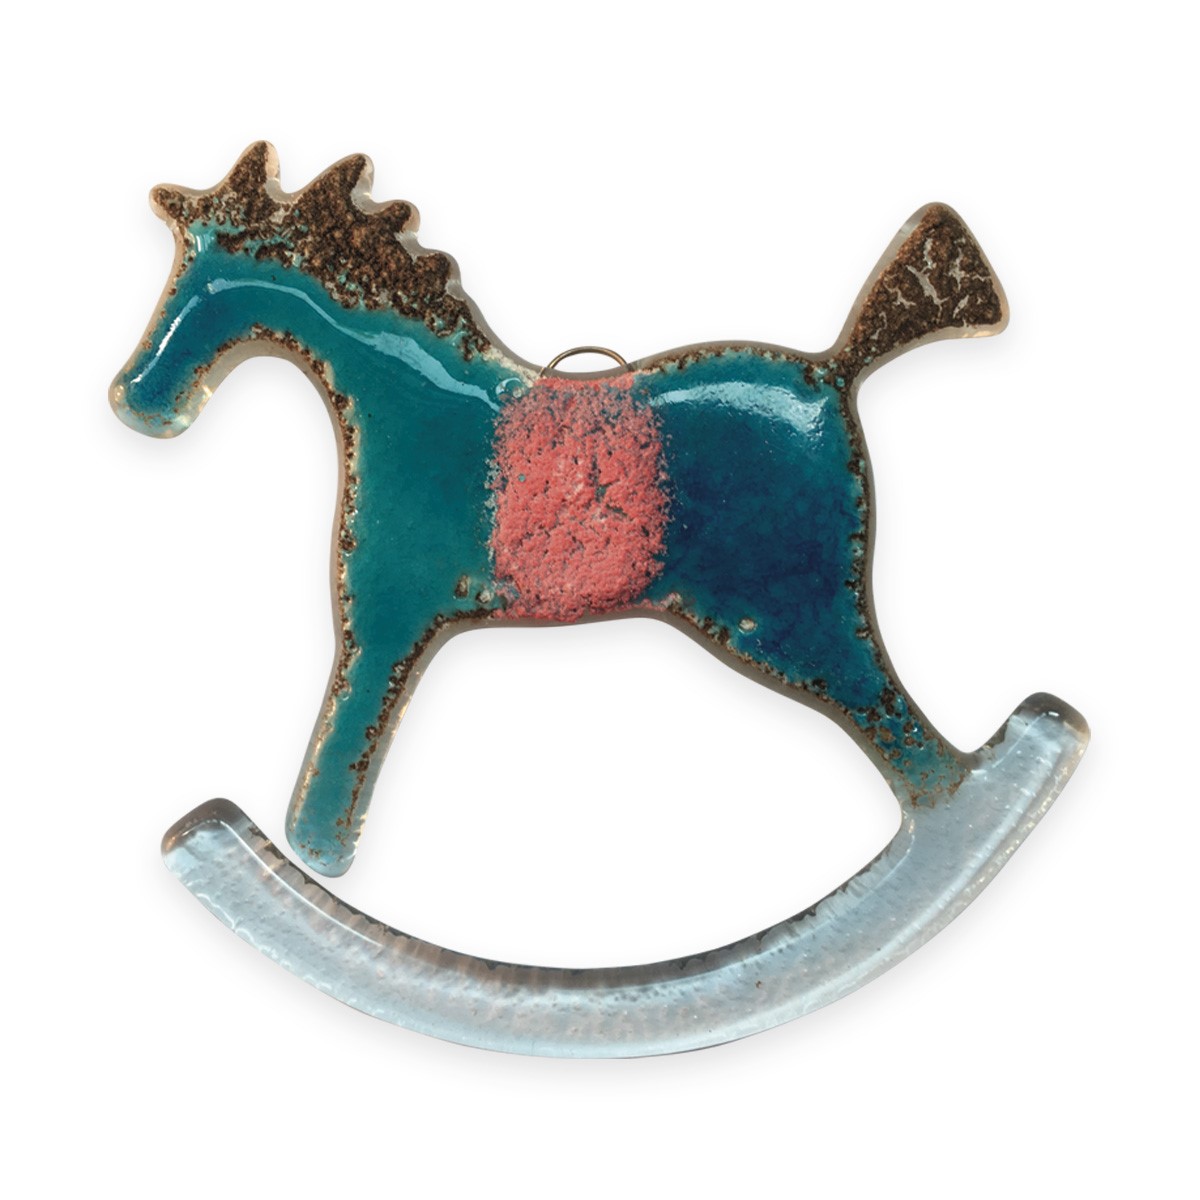 Rocking Horse : Blue : Tree ornament  : 1644-17 by Nobile'